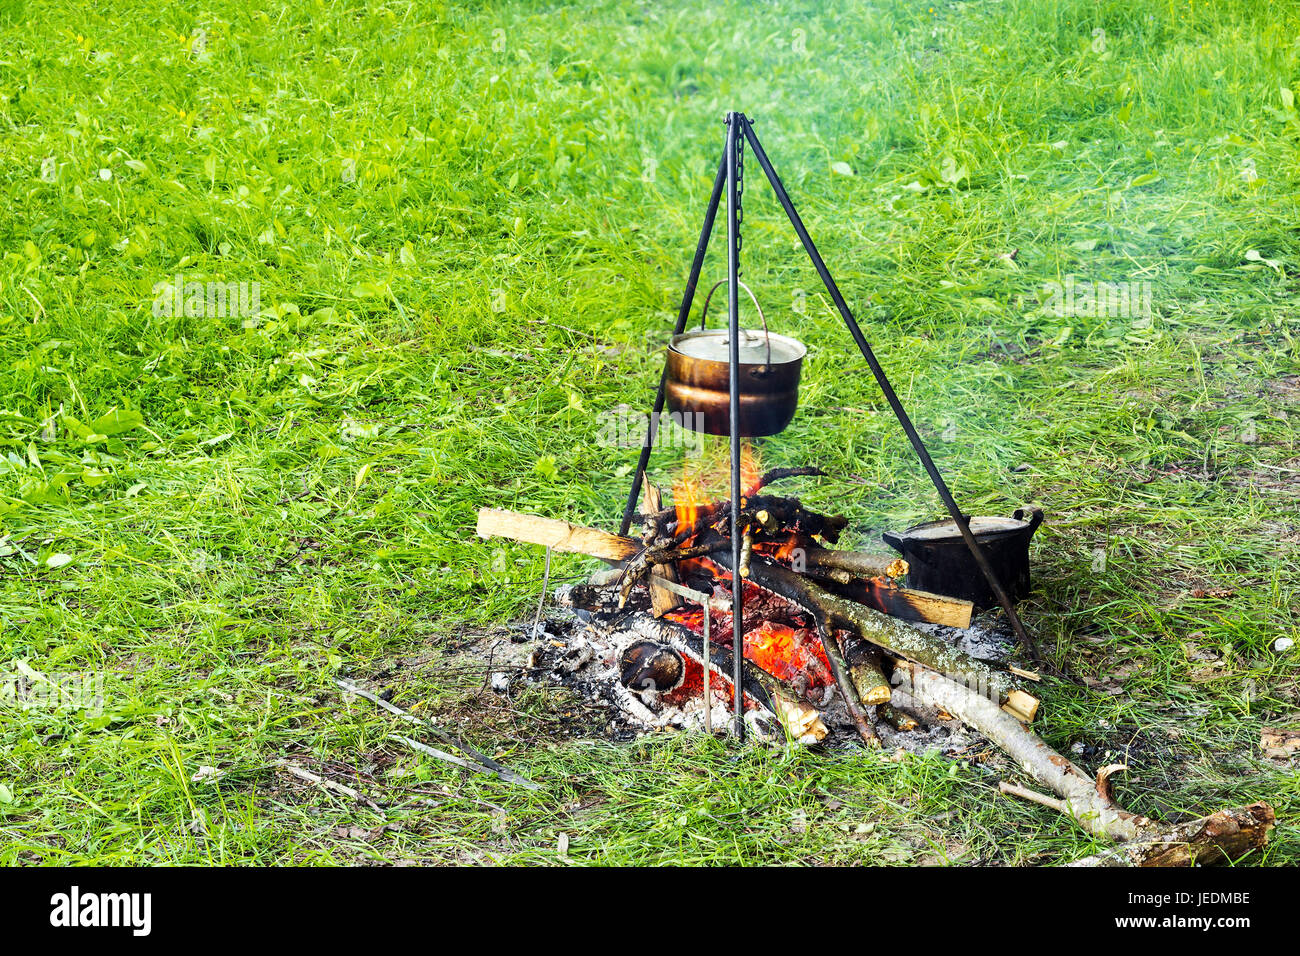 Bowler on a tripod over a fire, cooking food in a field tent camp Stock Photo